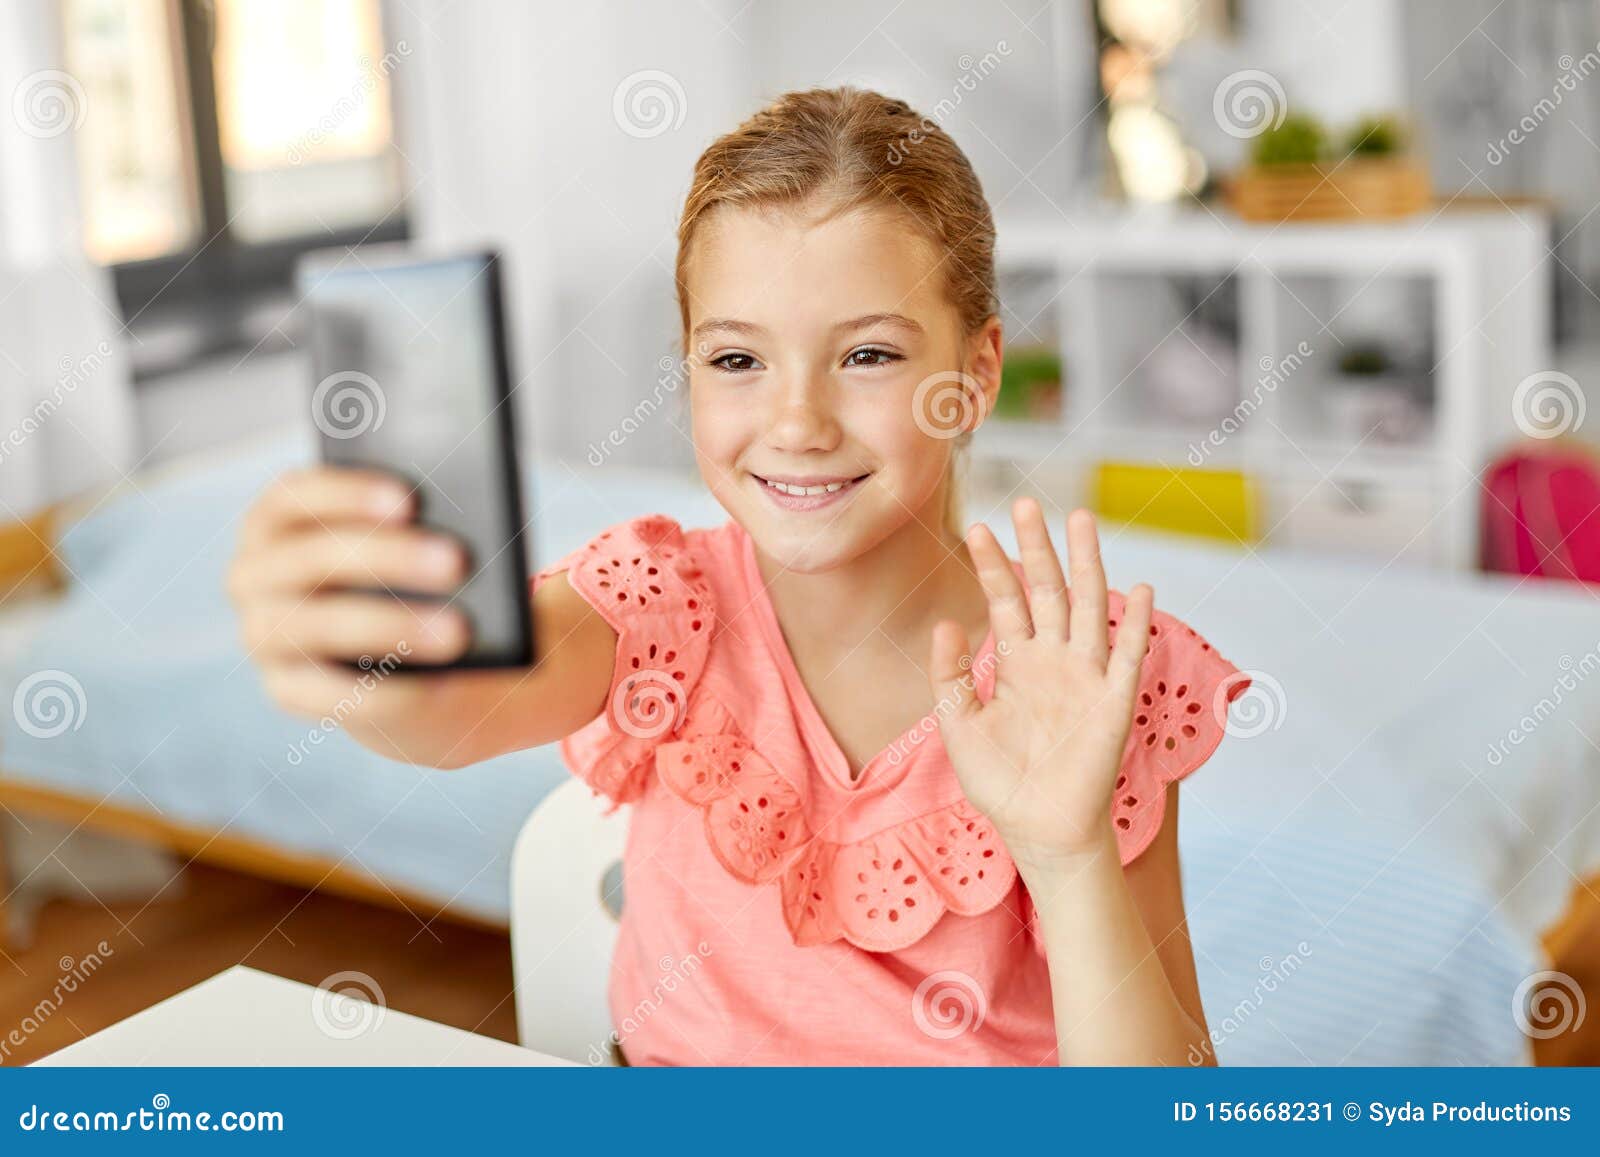 Happy Girl with Smartphone Taking Selfie at Home Stock Image - Image of ...